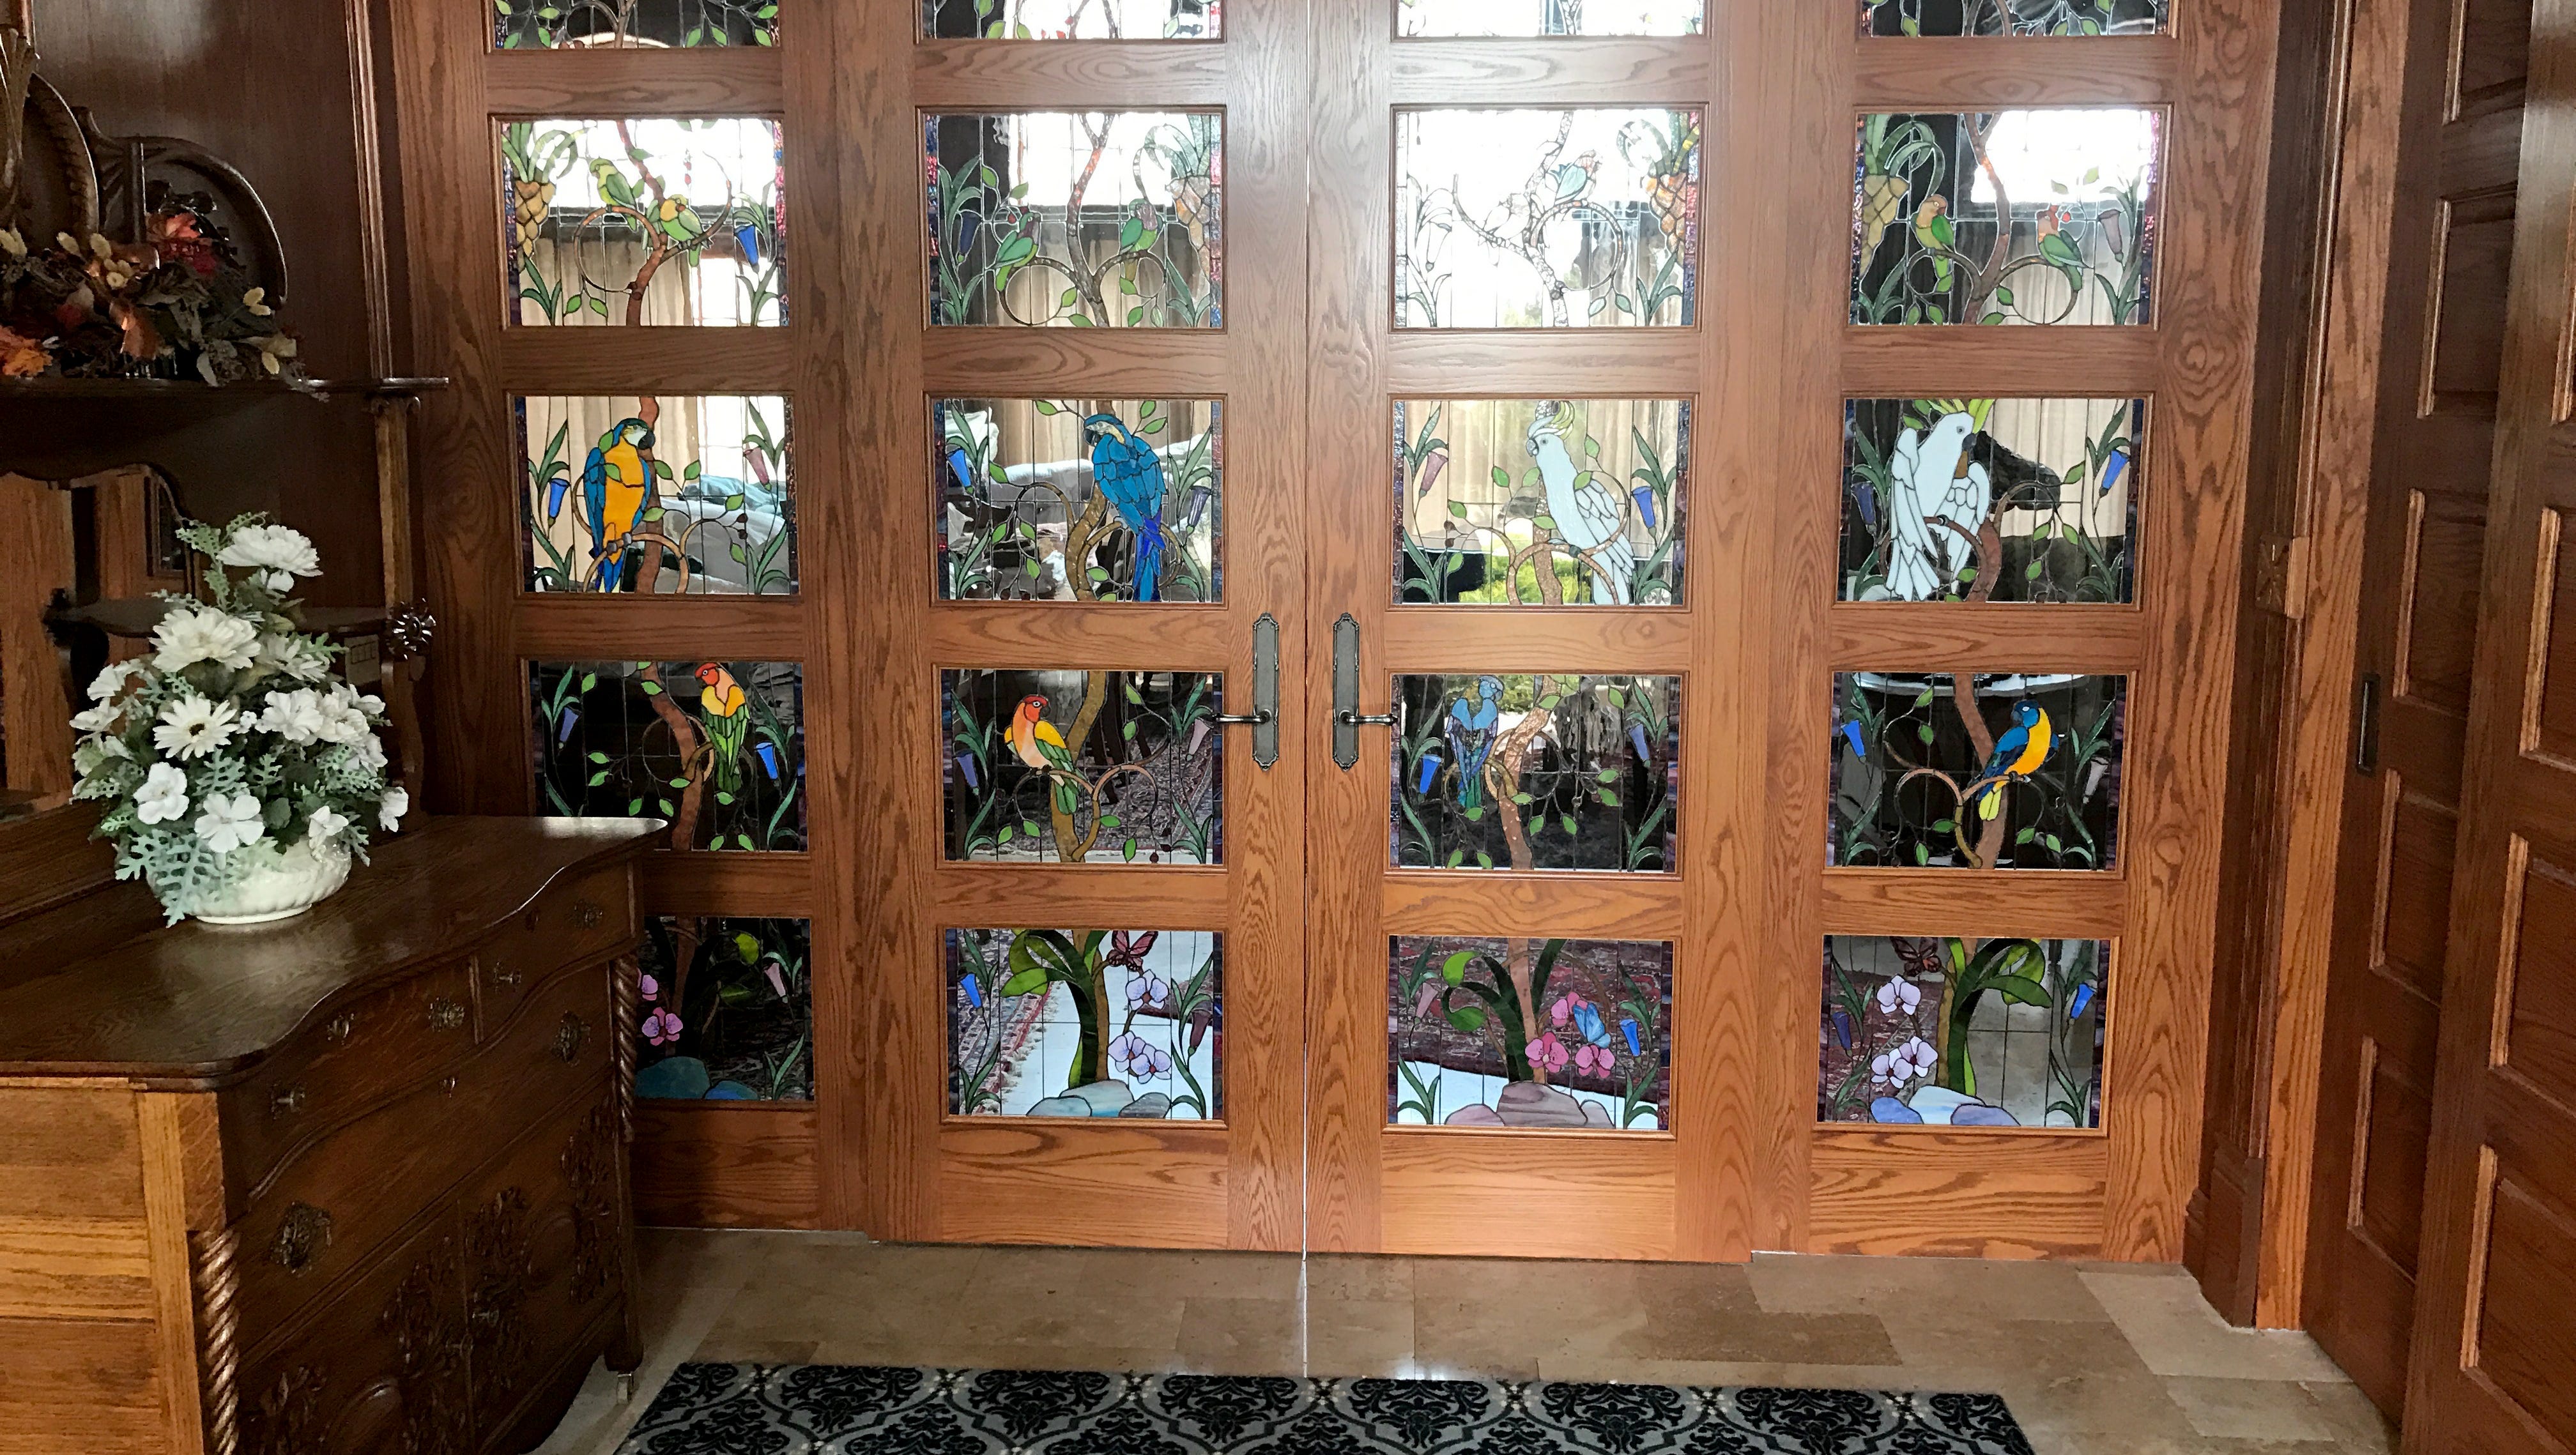 Stained glass windows of birds and foliage adorn the front doors.